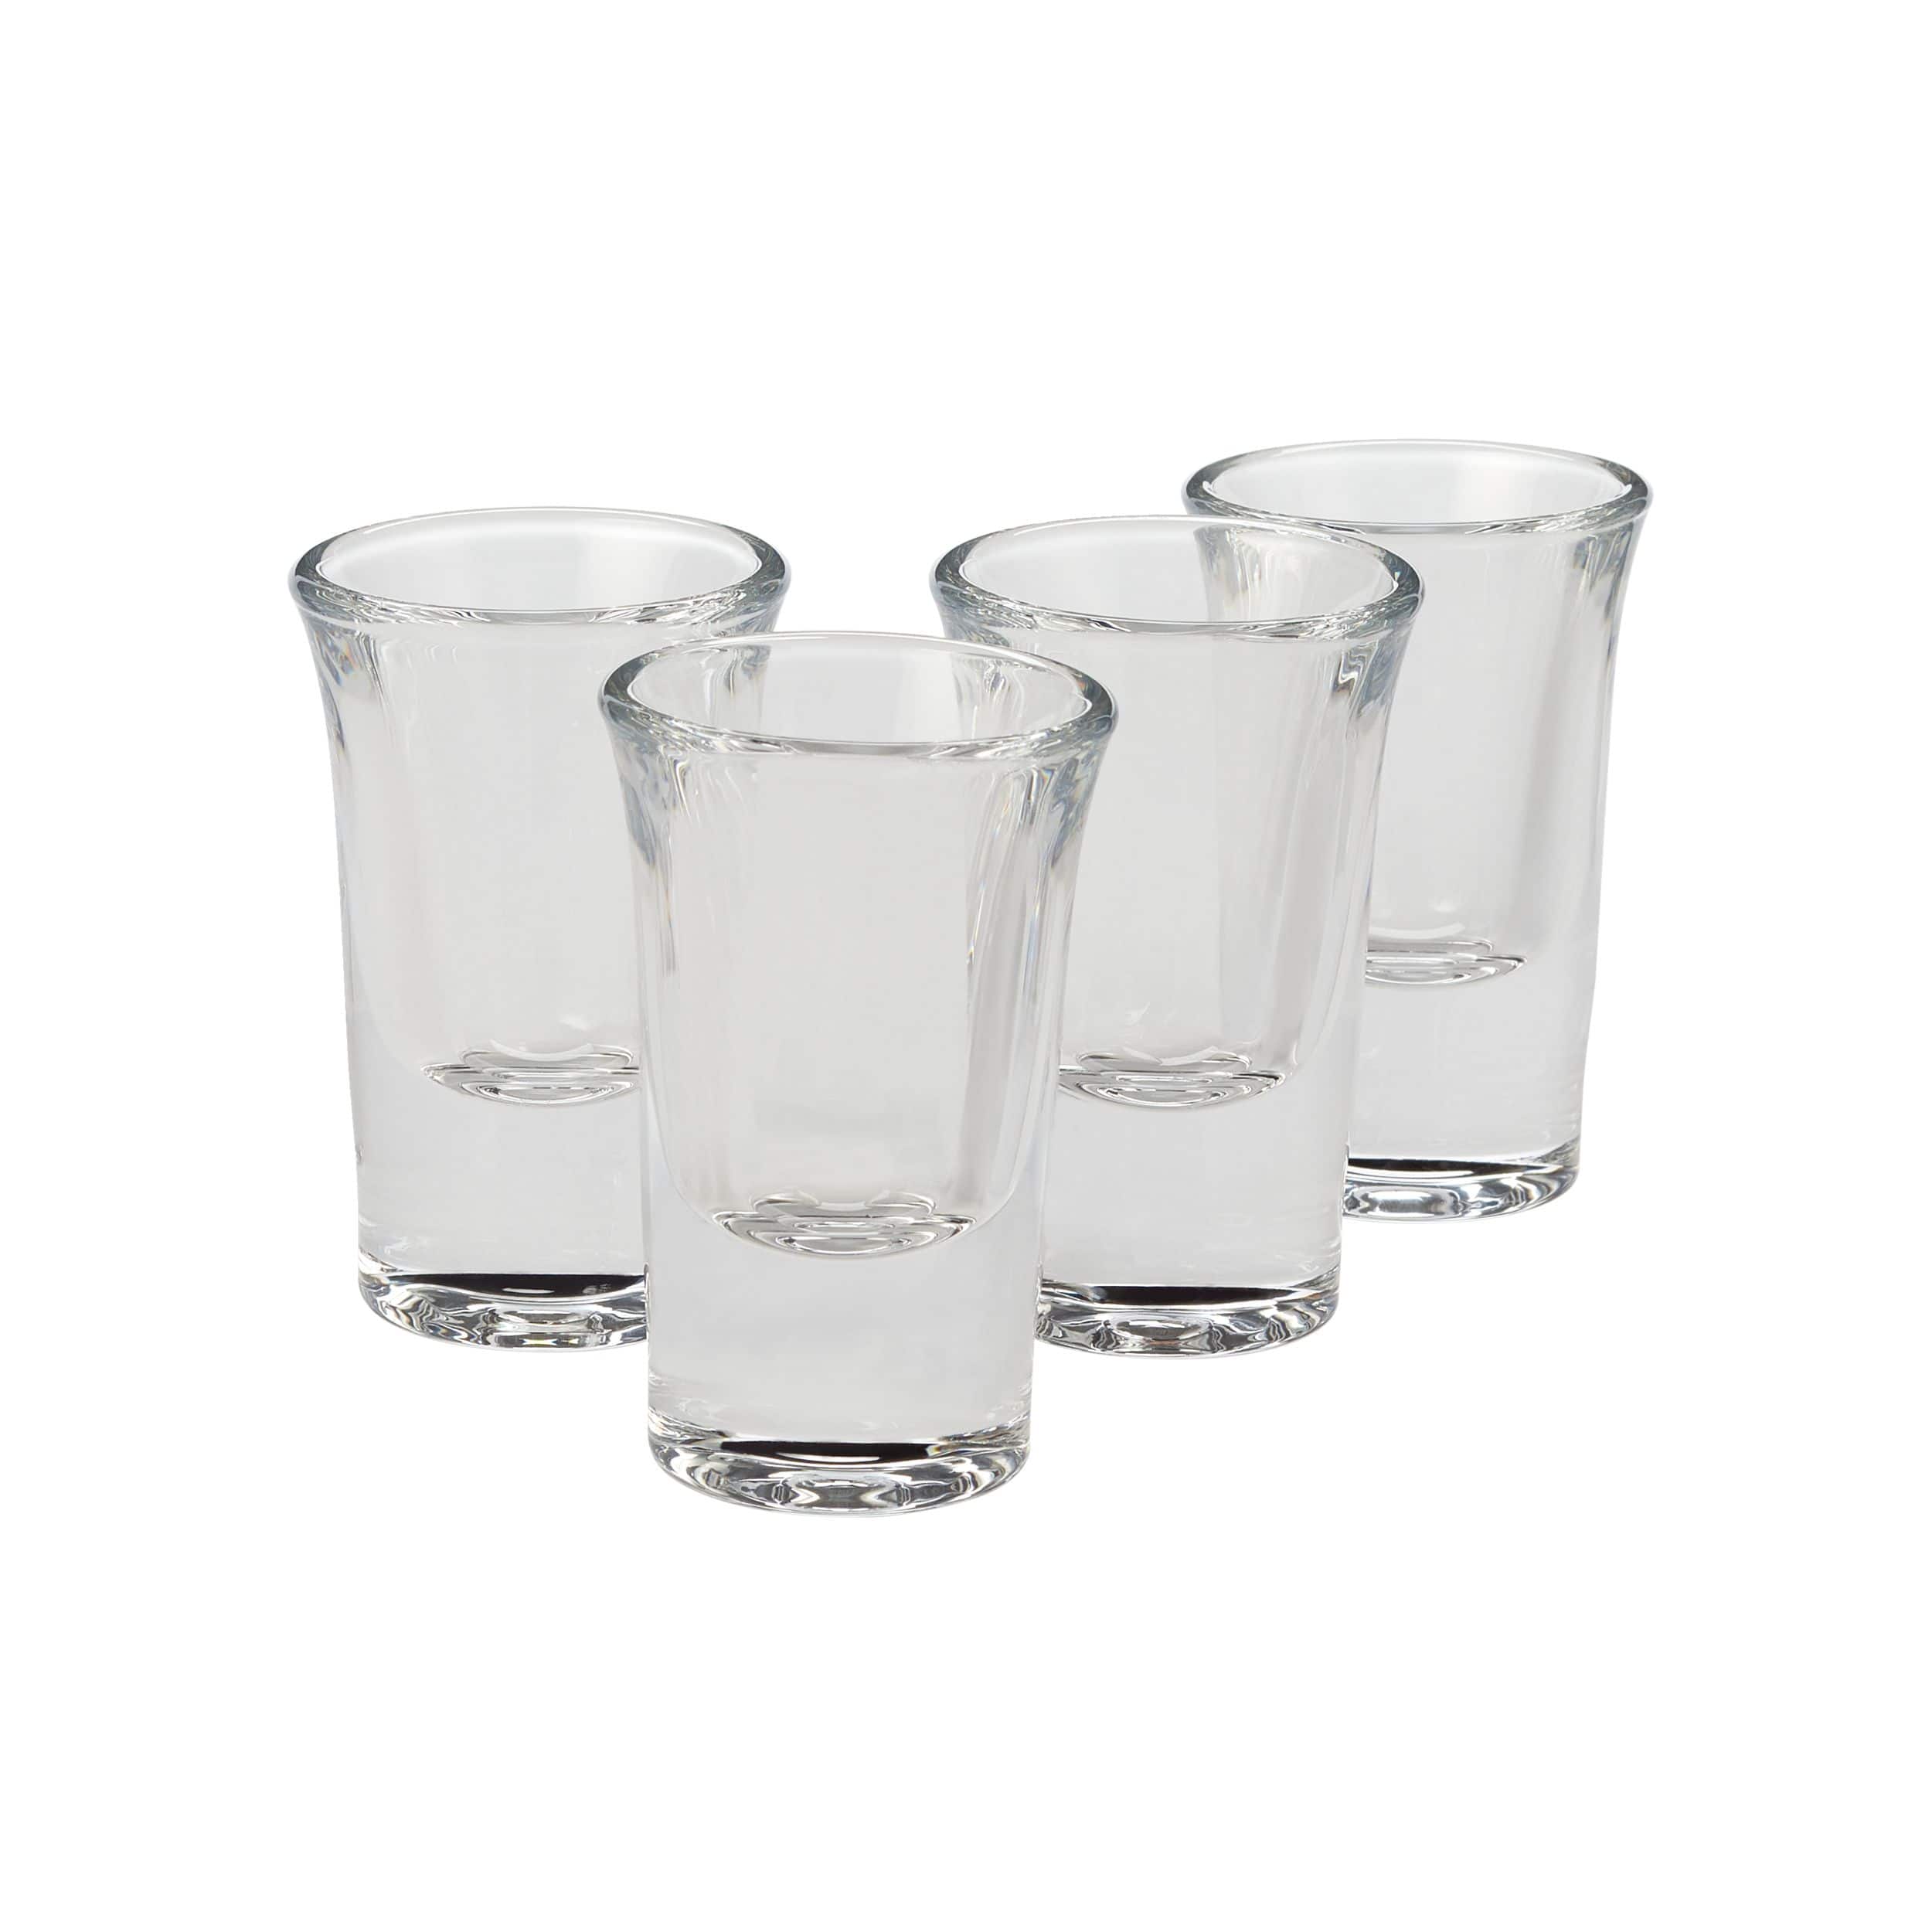 https://media-www.canadiantire.ca/product/living/kitchen/dining-and-entertaining/1429857/canvas-4-pack-shot-glasses-2oz-60ml--369b094b-9ab6-4157-87fd-d35c399dbdf6-jpgrendition.jpg